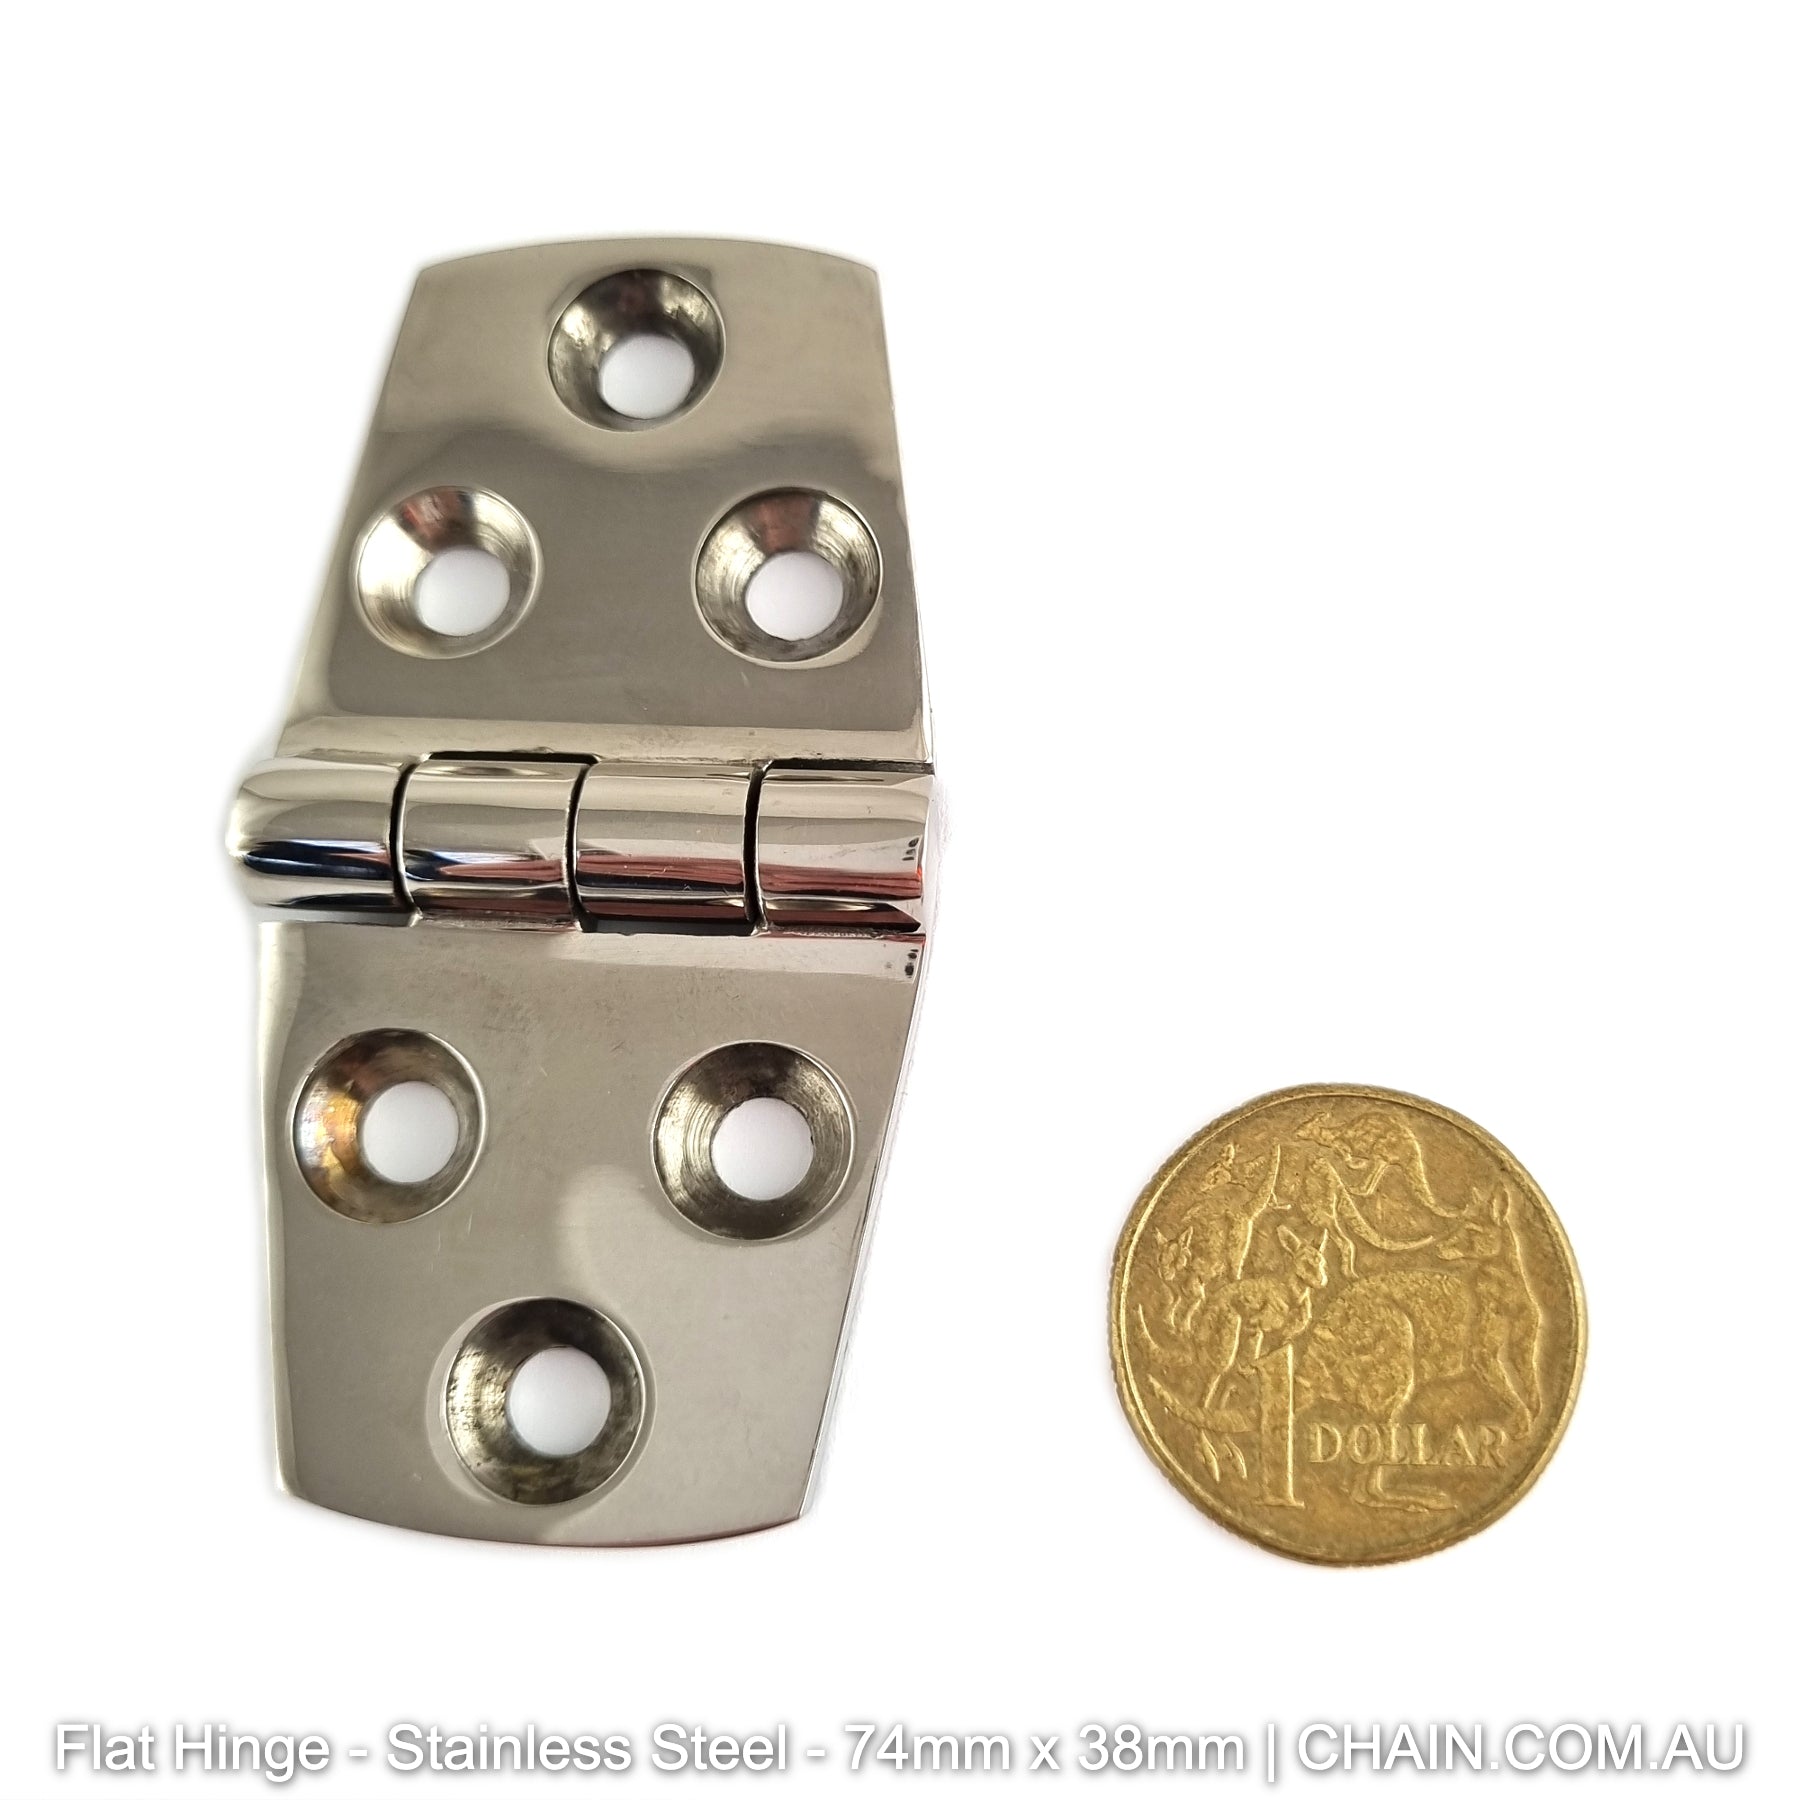 Flat Hinges in Stainless Steel. Size: 74mm x 38mm. Shop online chain.com.au. Shipping Australia wide.